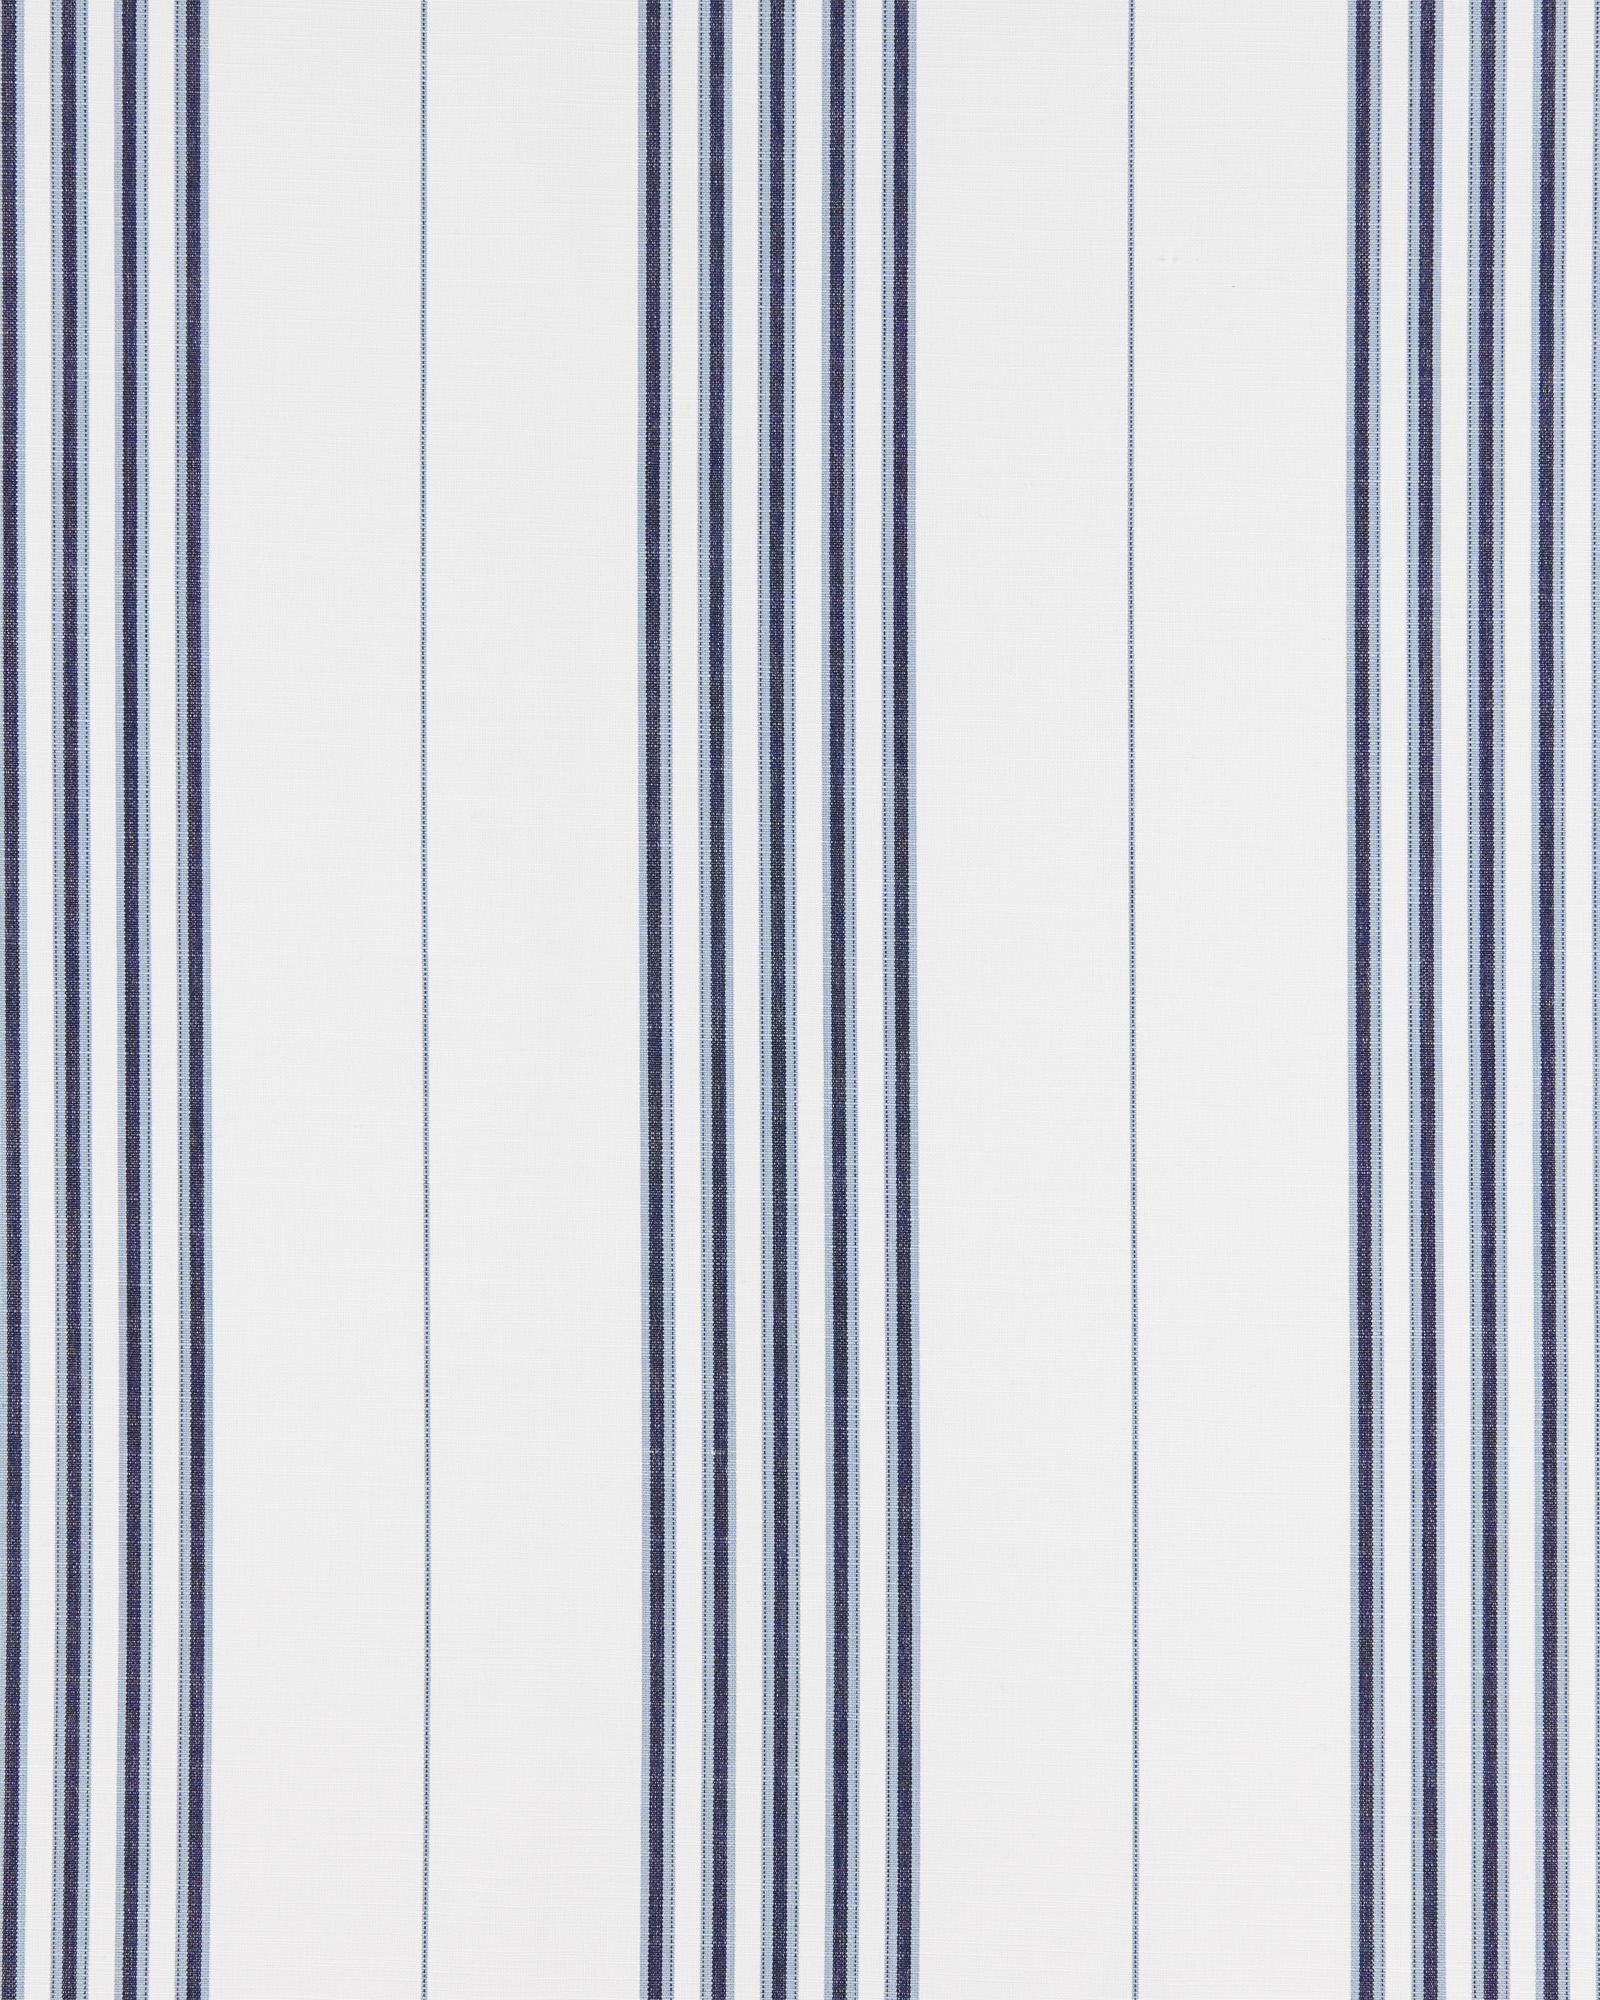 Striped Canvas Fabric in Navy Blue and White, Slipcovers / Upholstery, 100 % Cotton, 54 Wide, By the Yard